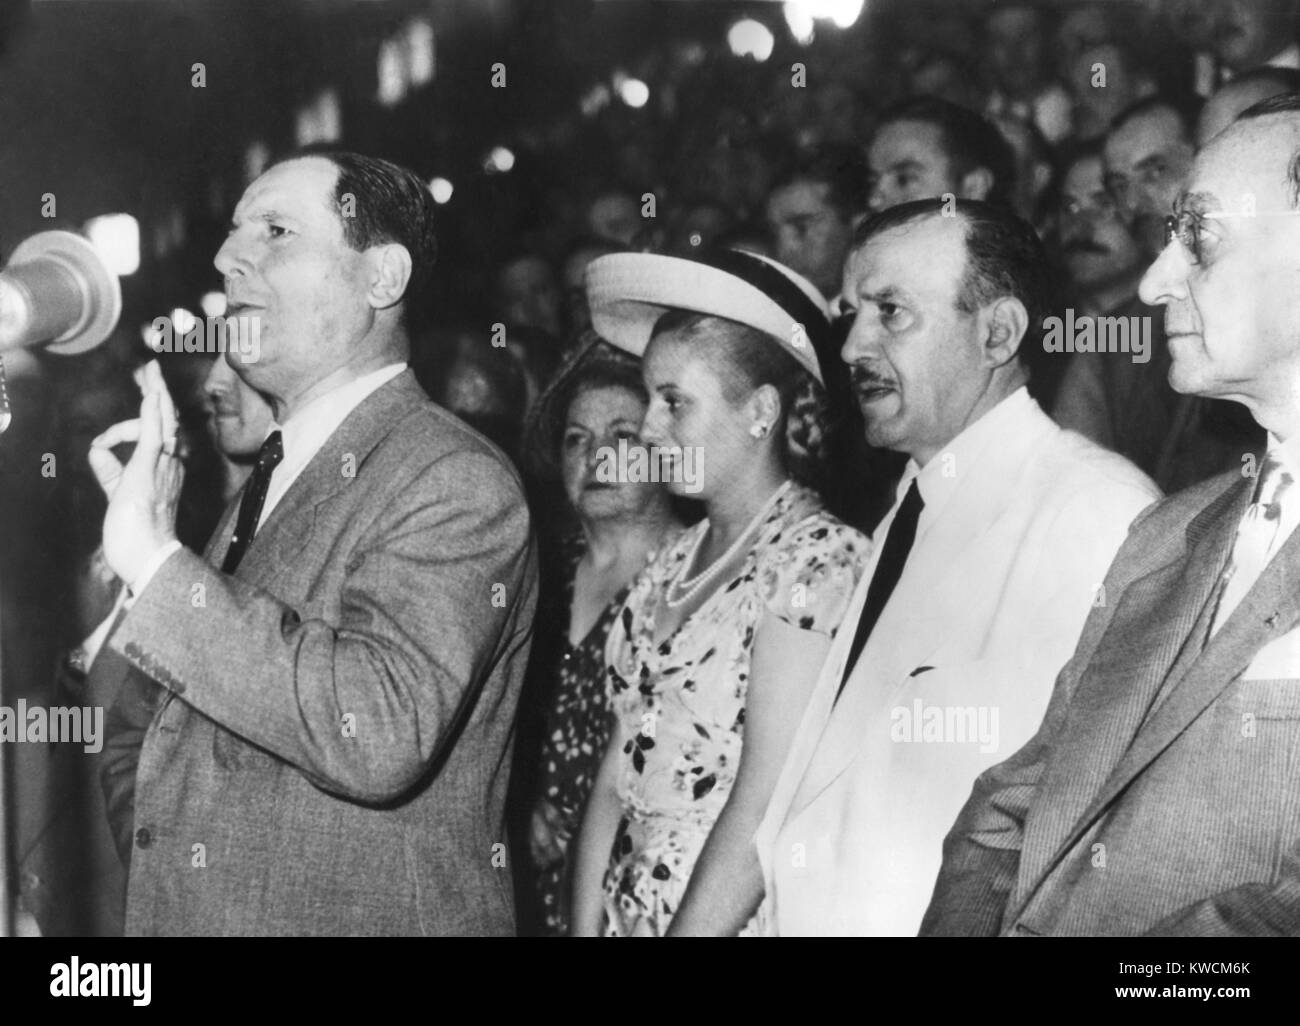 Argentine President Juan Domingo Peron addressing an assembly in Buenos Aires. Behind him (in straw hat), is his wife, Senora Maria Eva Duarte de Peron. Ca. 1946-1950. - (BSLOC 2014 14 20) Stock Photo